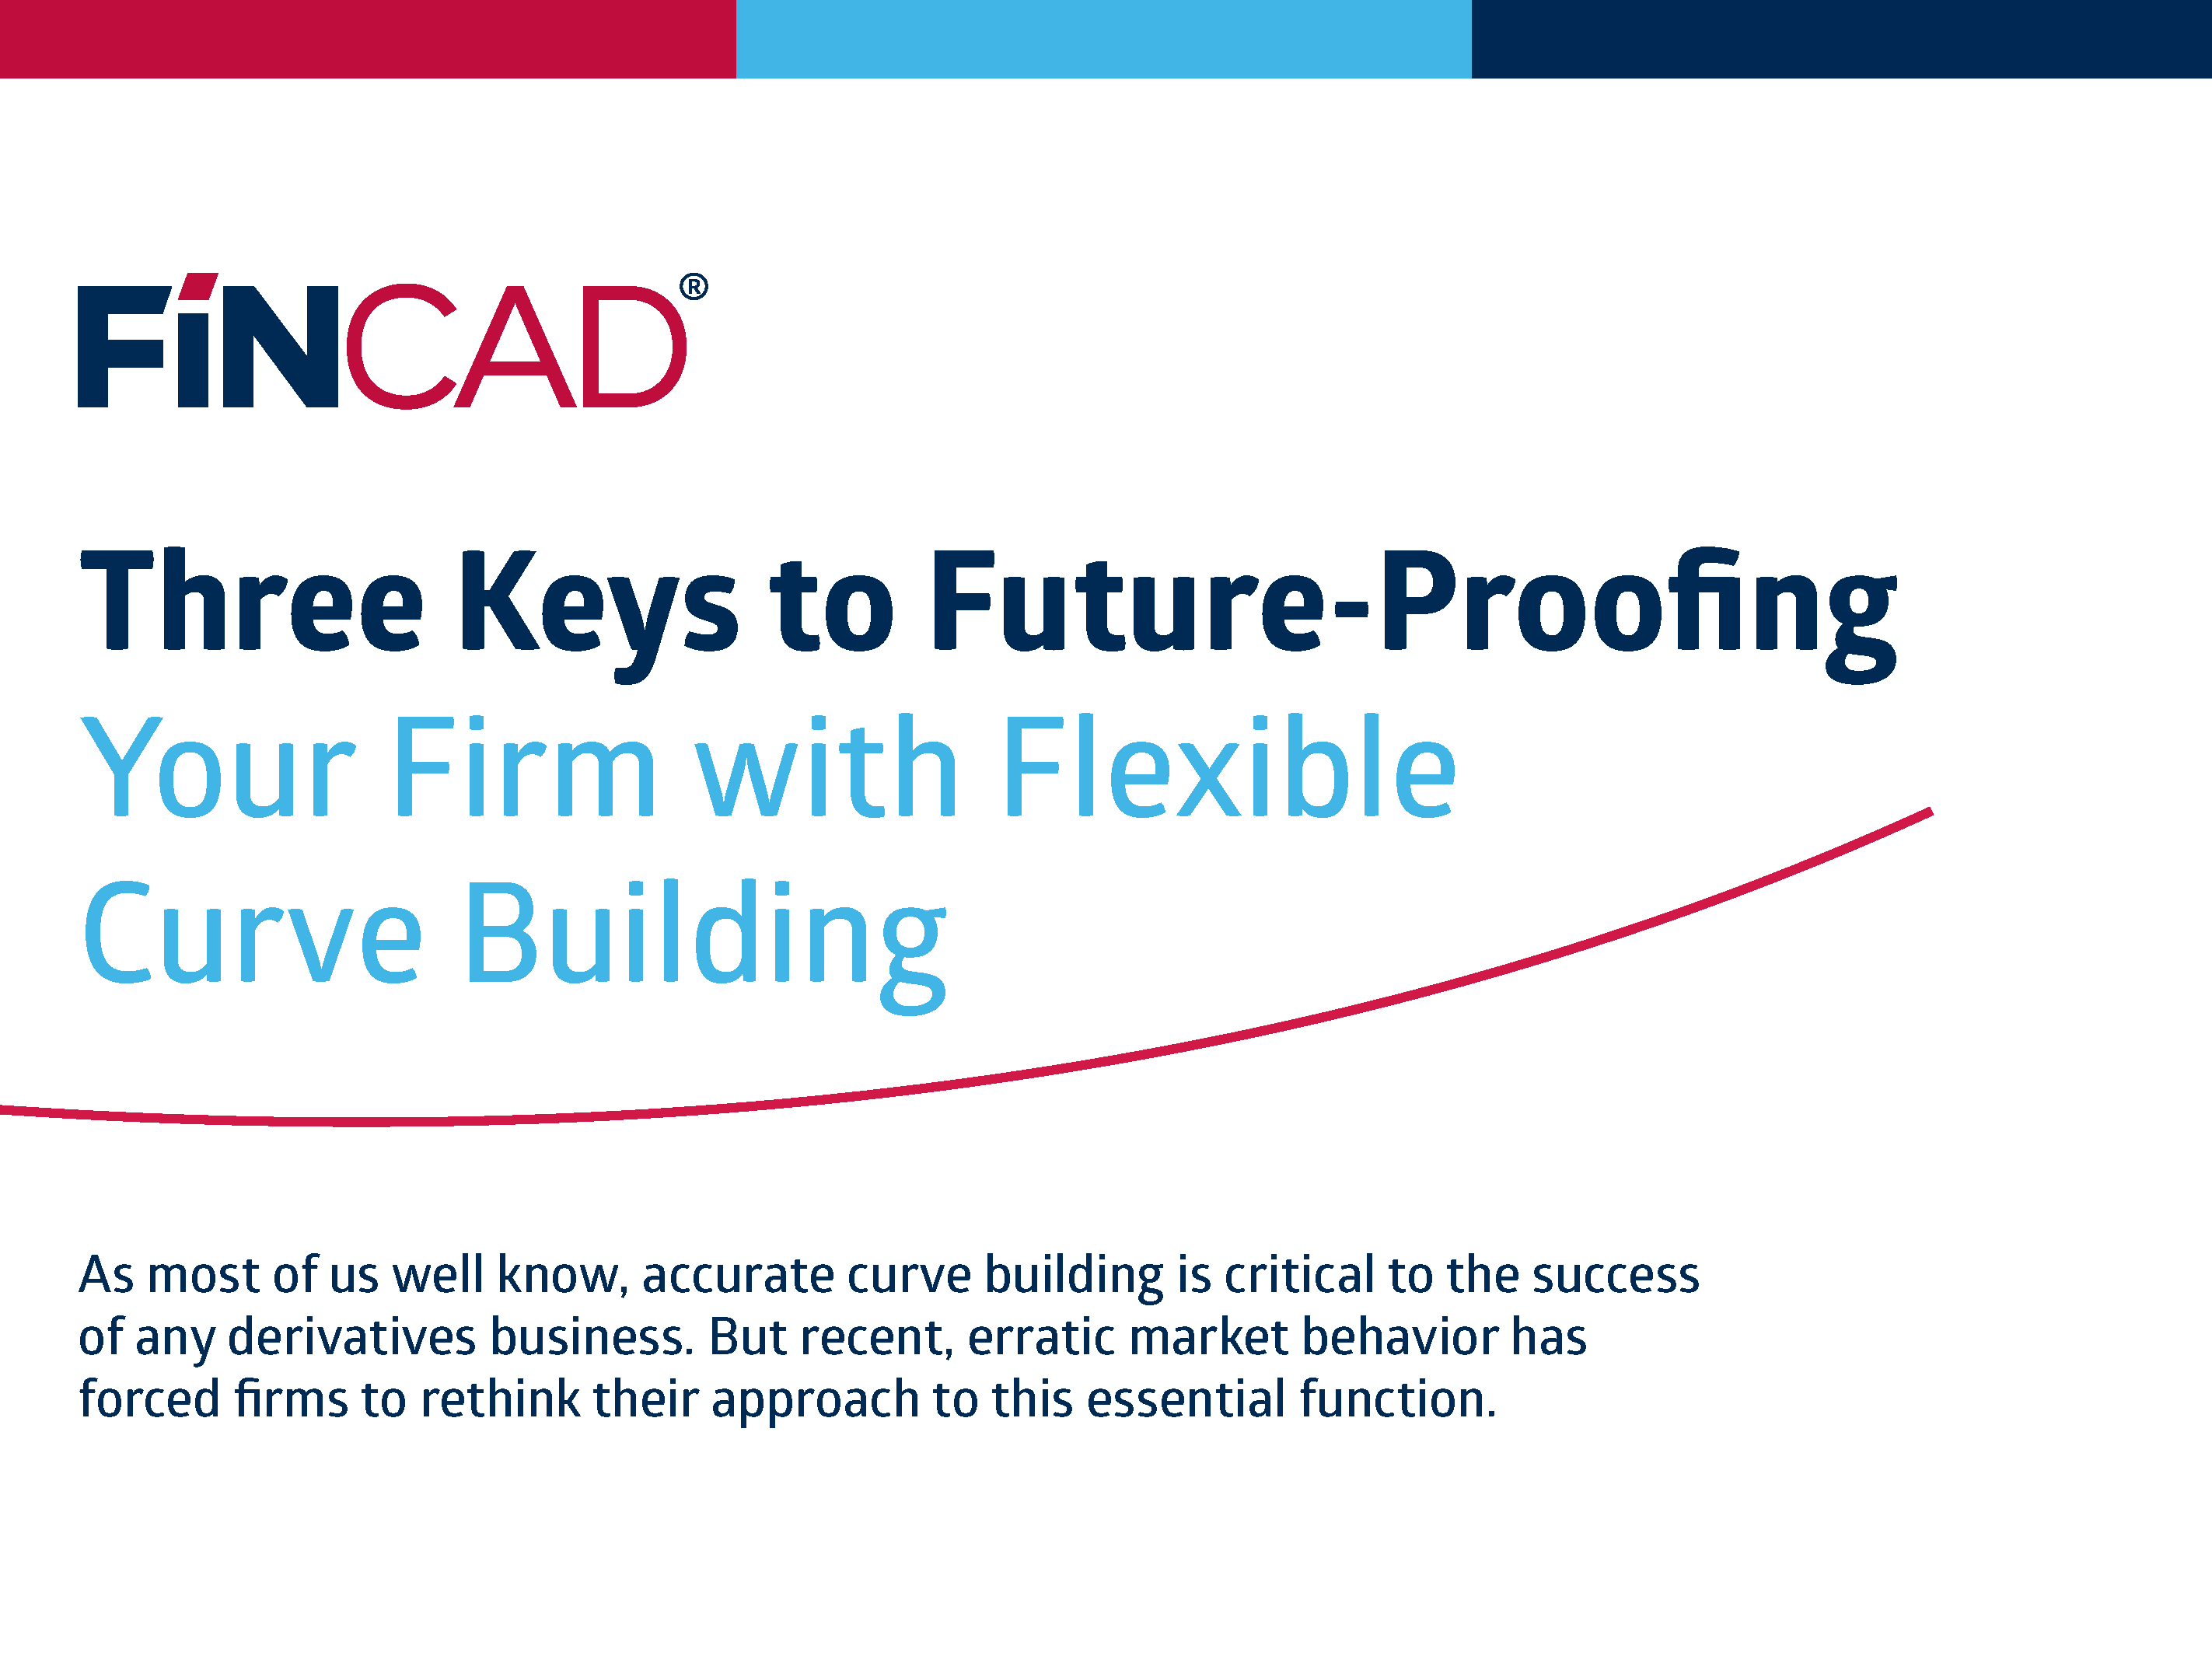 Three Keys to Future-proofing Your Firm with Flexible Curve Building: eBook